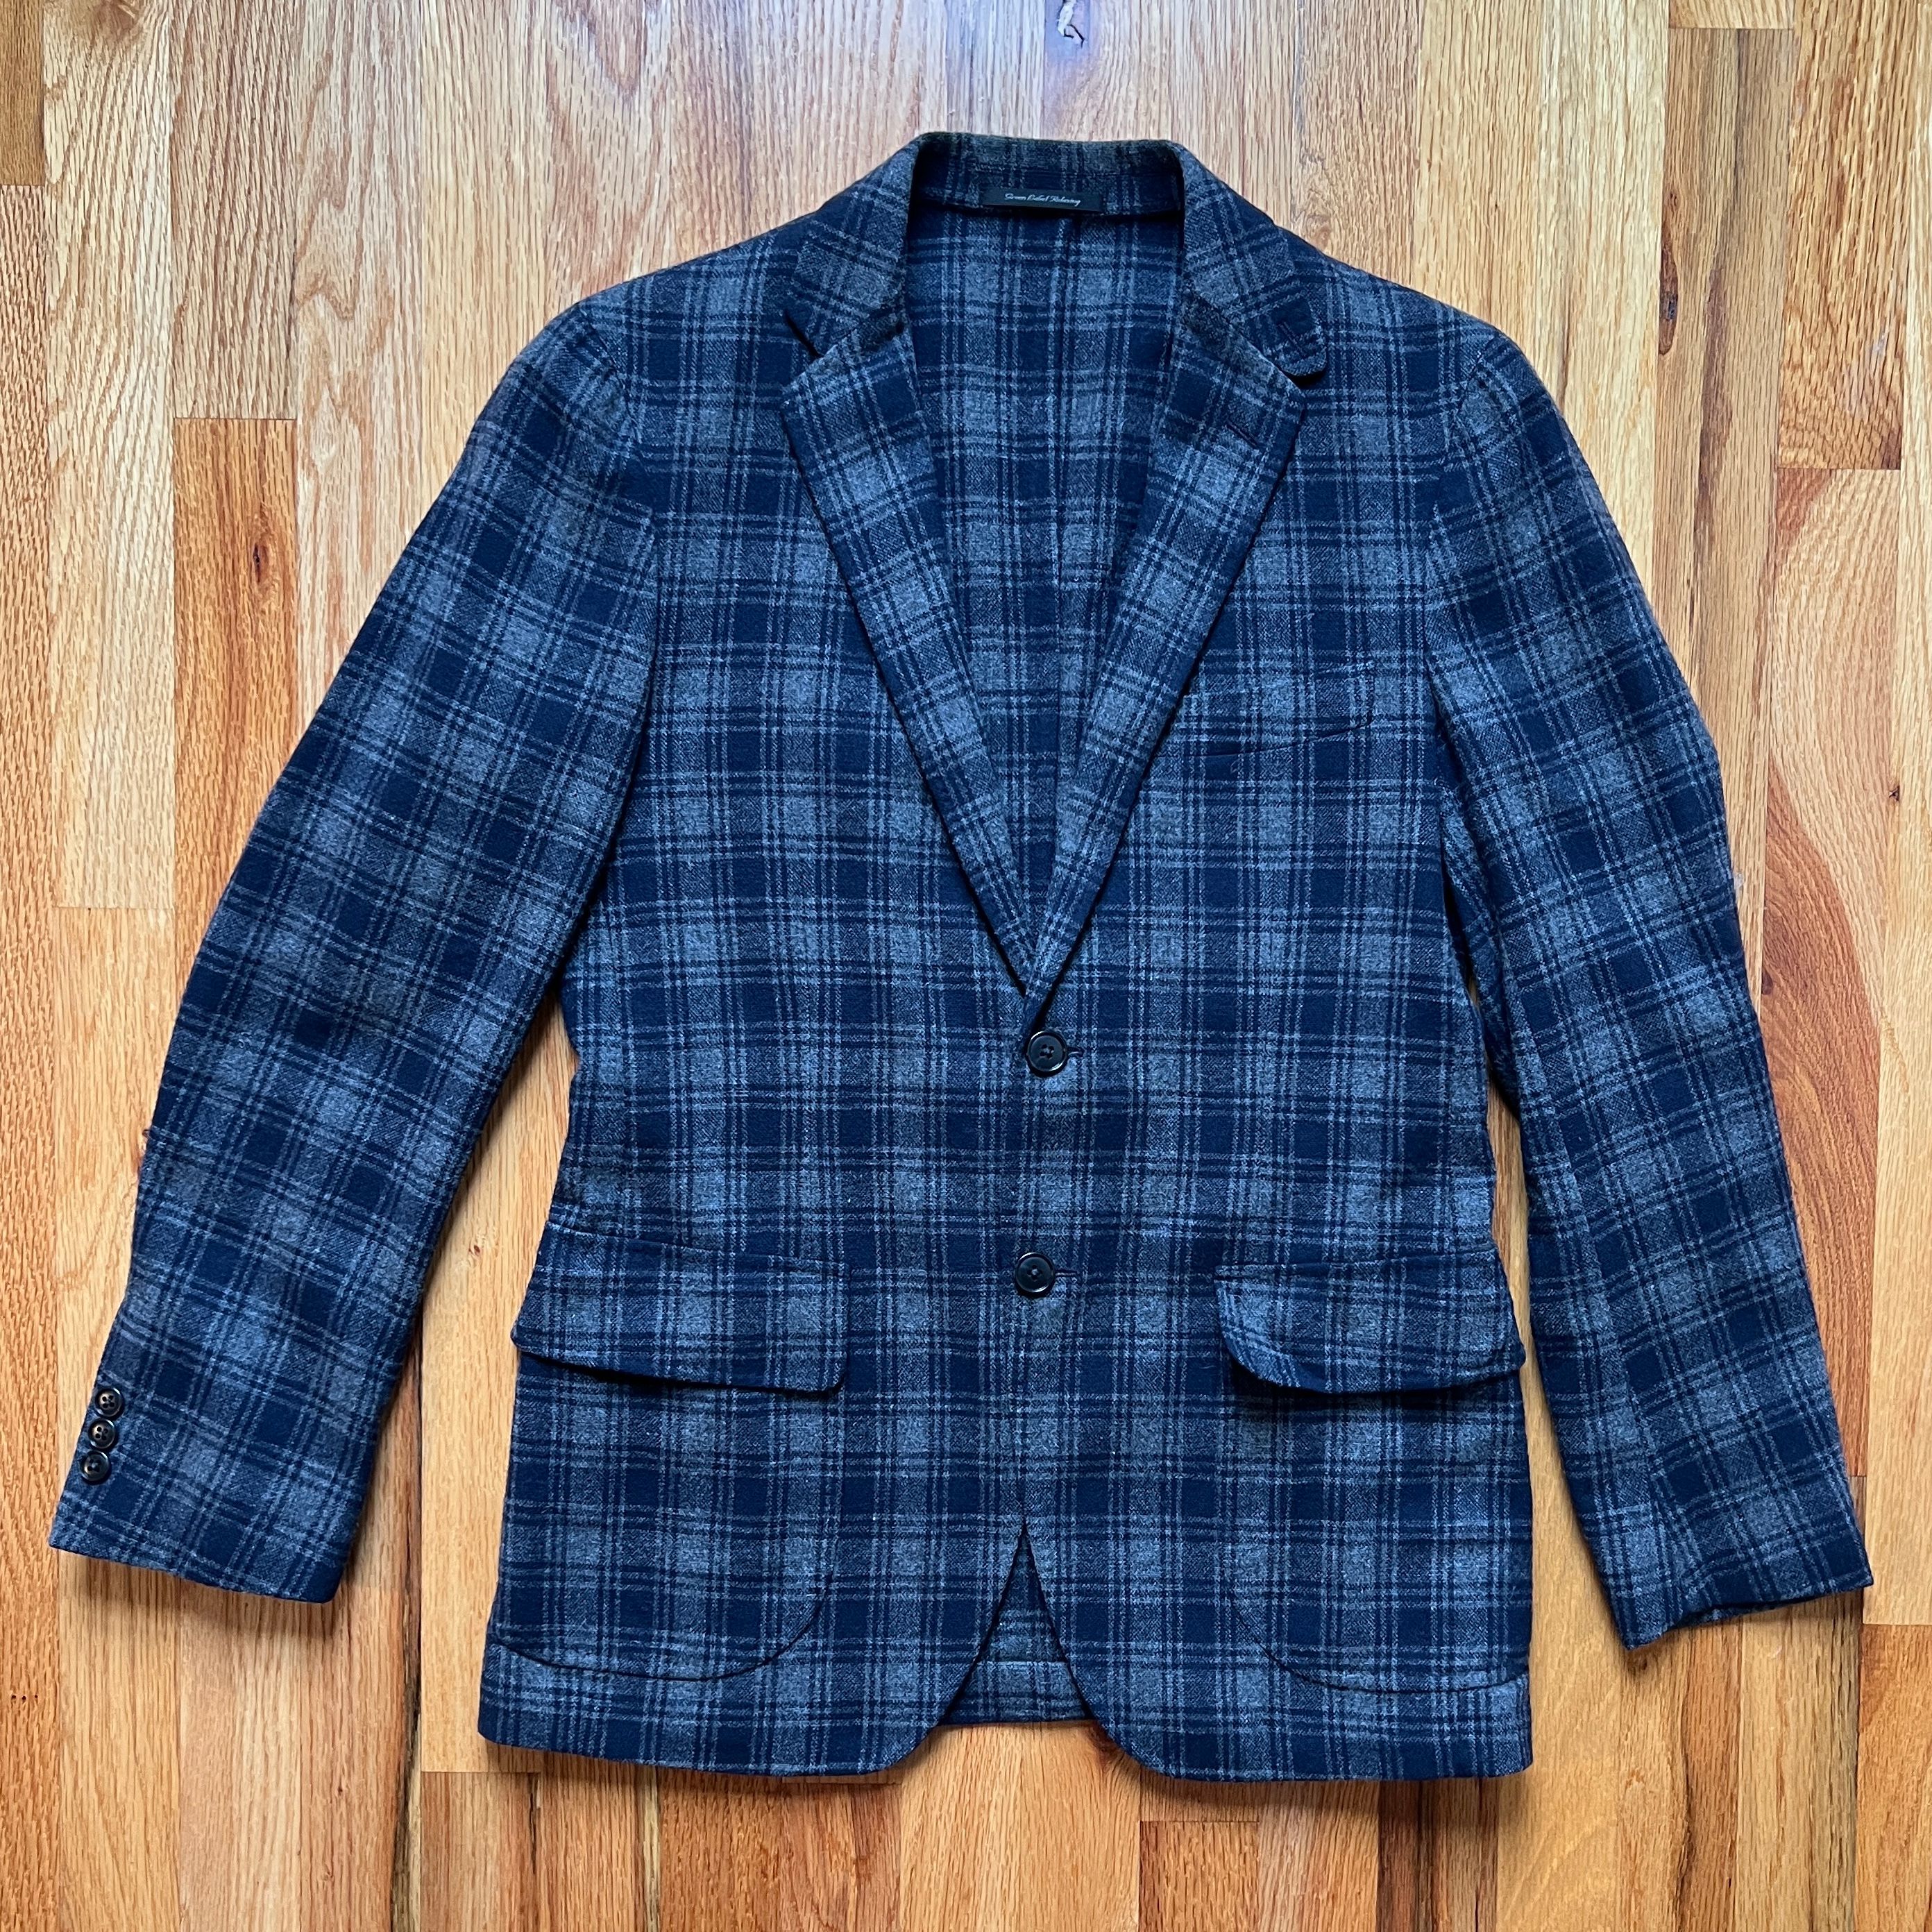 United Arrows UNITED ARROWS GREEN LABEL RELAXING PLAID WOOL BLAZER 36R Size 36R - 1 Preview